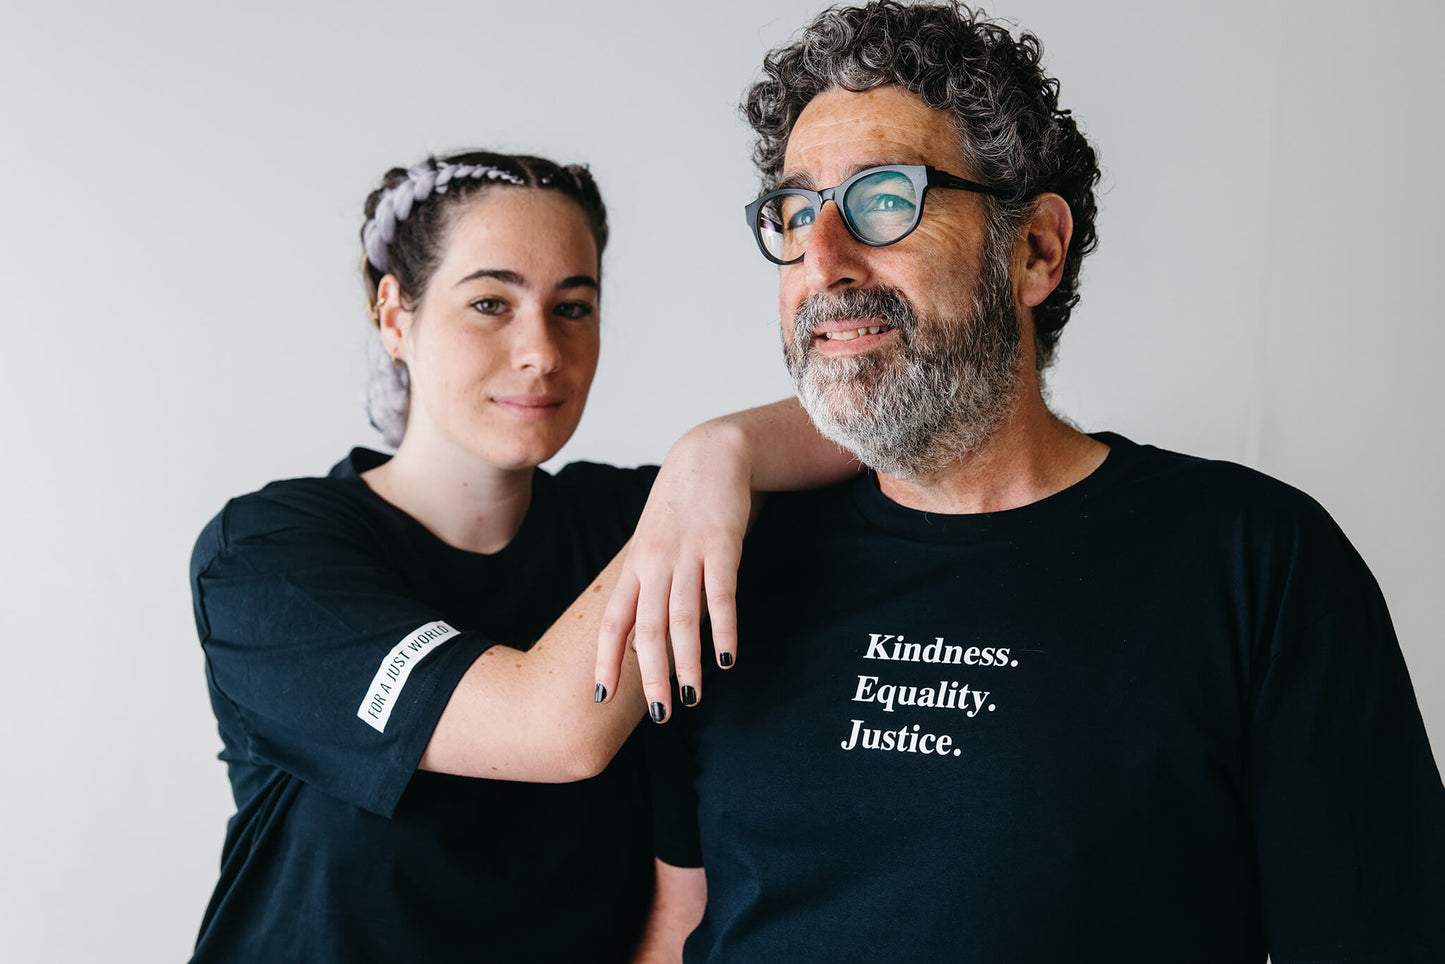 Sofia leaning on Joe's shoulder. Joe is looking into the distance wearing an ink blue tshirt with the words 'Kindness Equality Justice.' written in white.